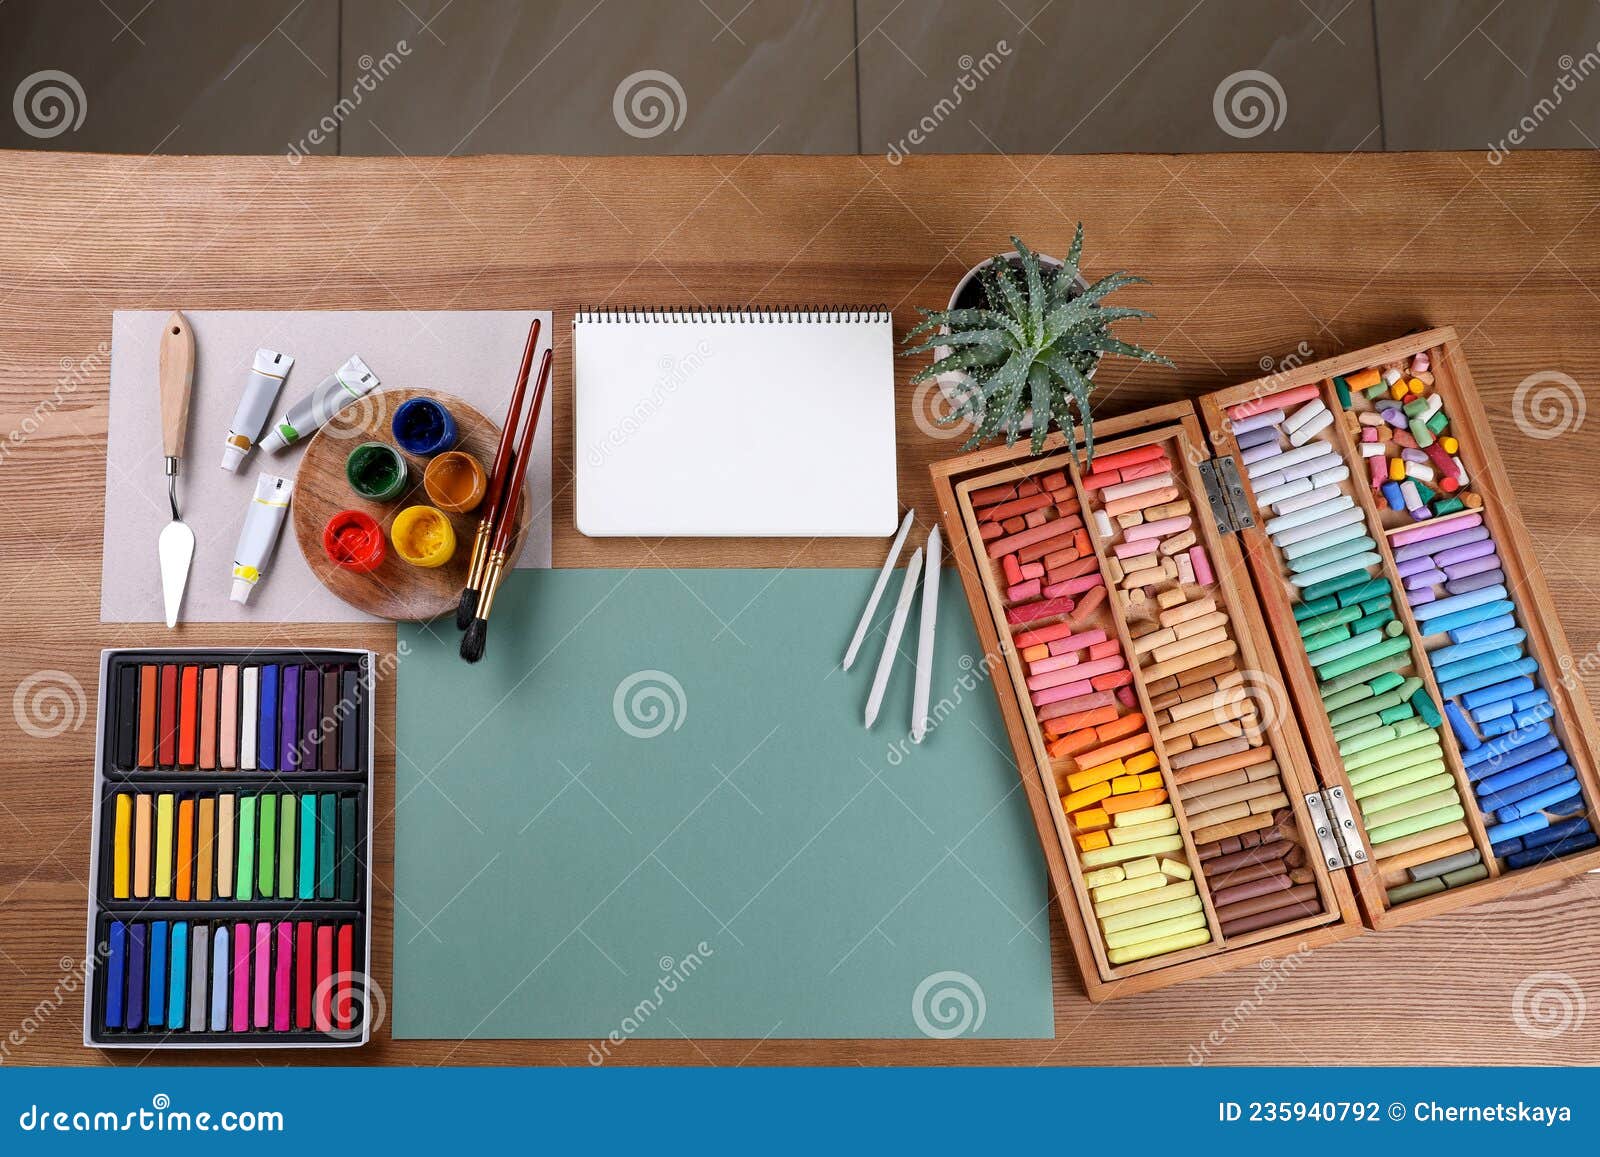 Soft pastels for artists and drawing paper on the wooden table